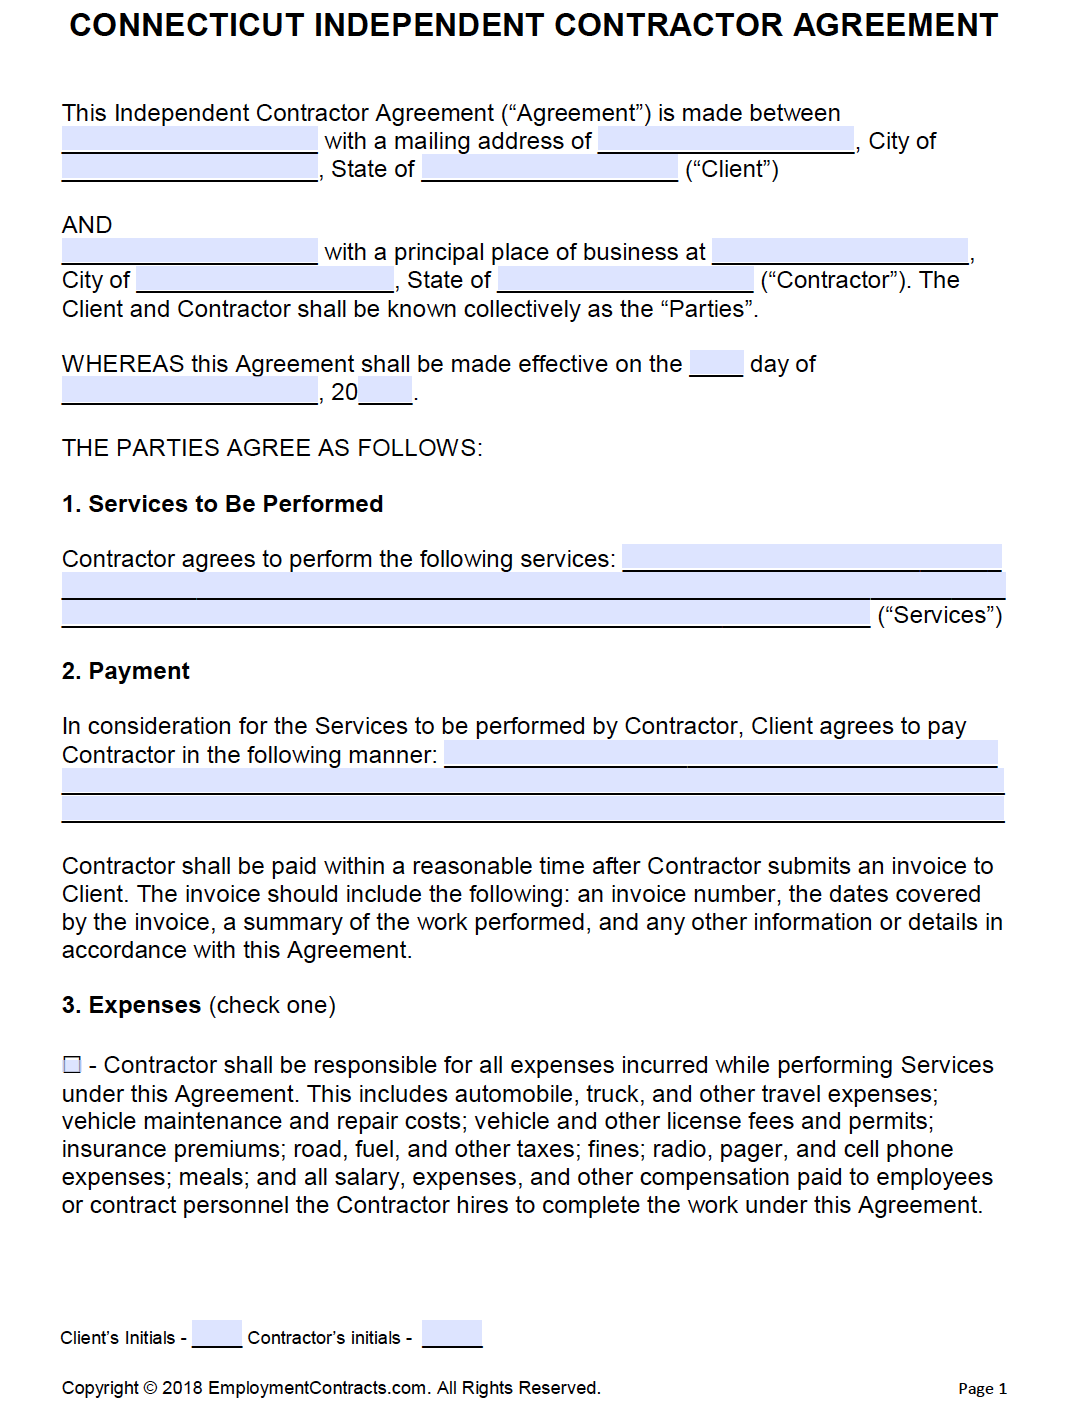 connecticut-independent-contractor-agreement-pdf-word